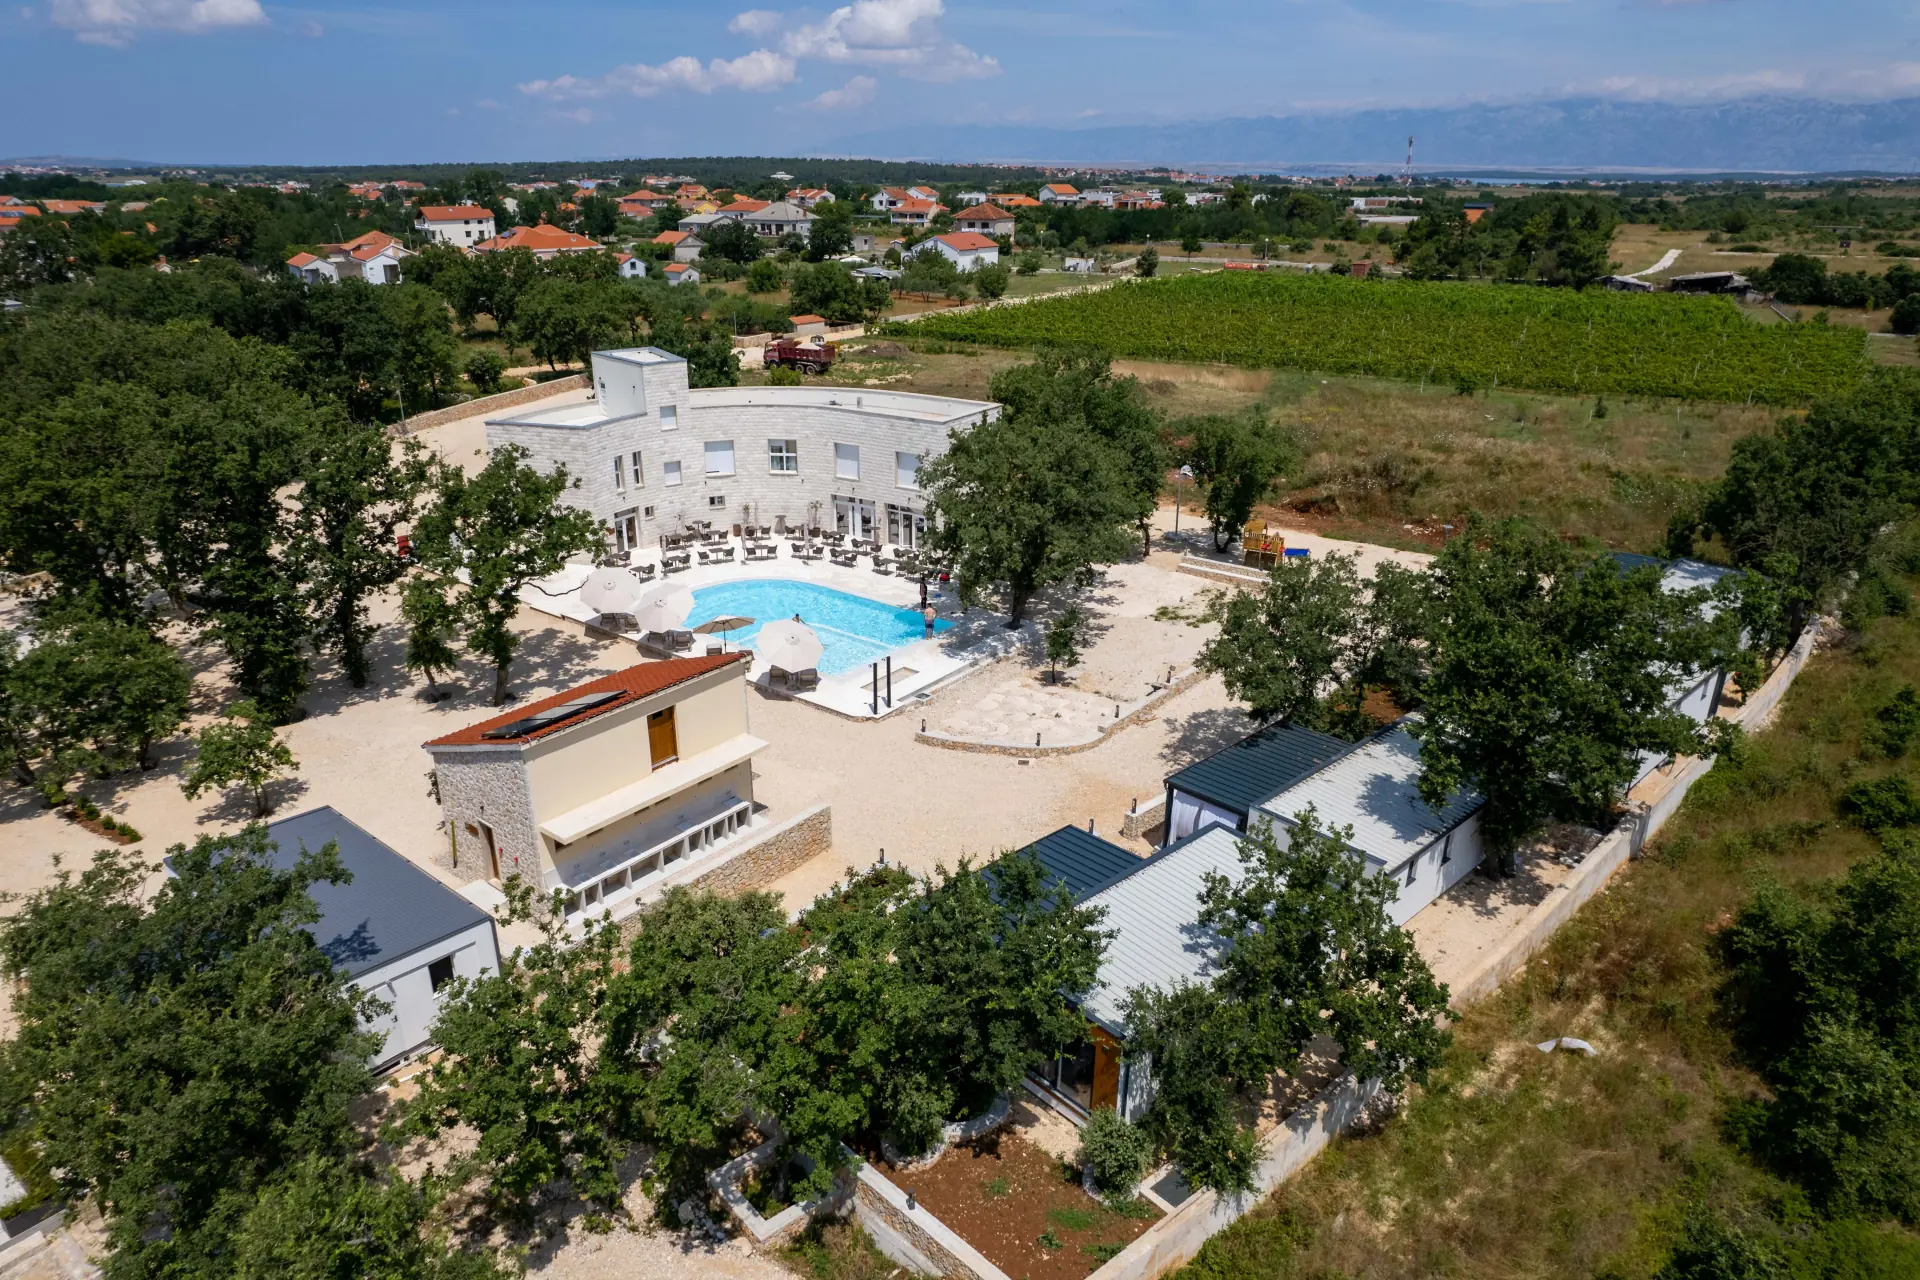 An aerial view of a resort with a swimming pool in Zaton, Dionis Camping Zaton, Croatia. The resort is surrounded by green trees and has a clear blue swimming pool